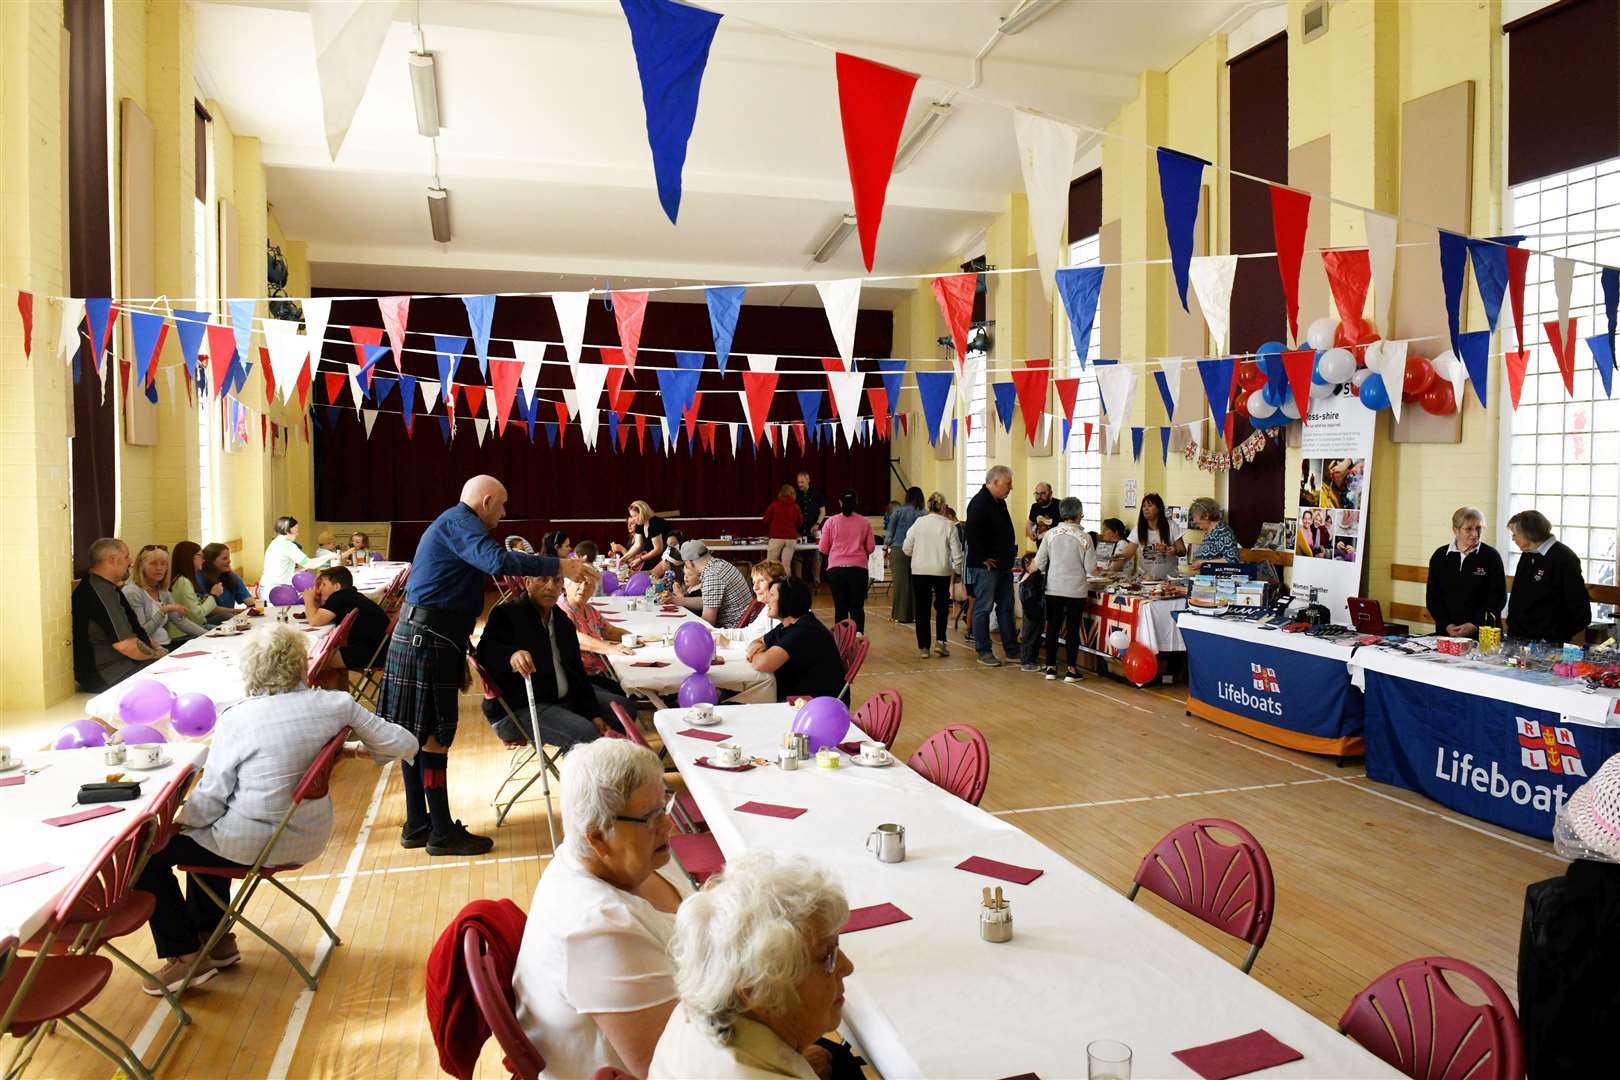 Queen's Jubille Celebrations at North Kessock: North Kessock village hall interior.Picture: James Mackenzie.